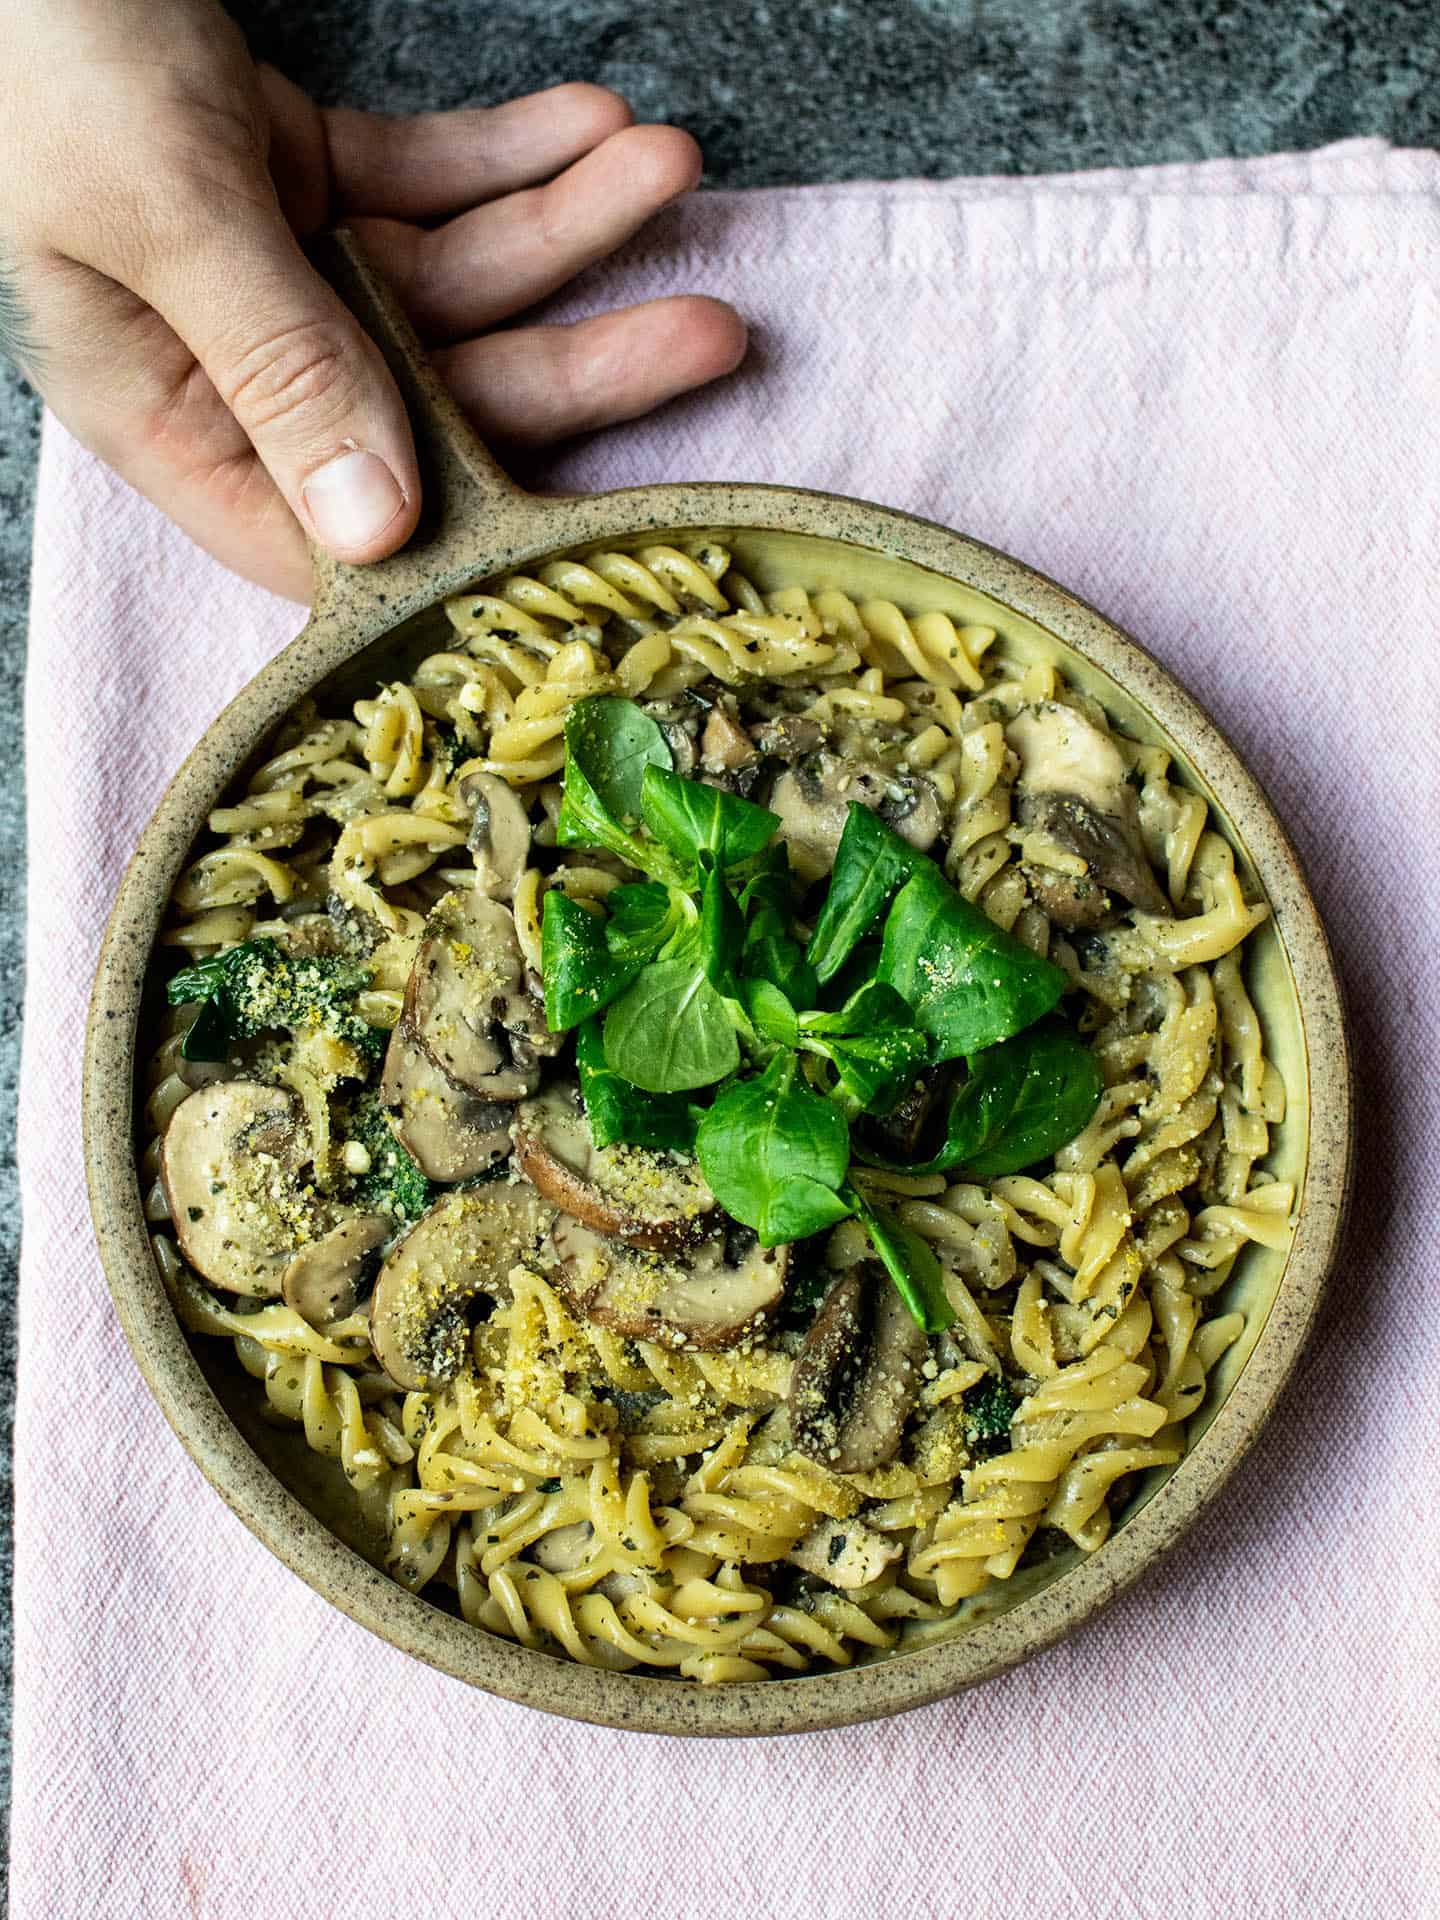 A top down photo of a bowl of creamy mushroom pasta with a hand holding the bowl.